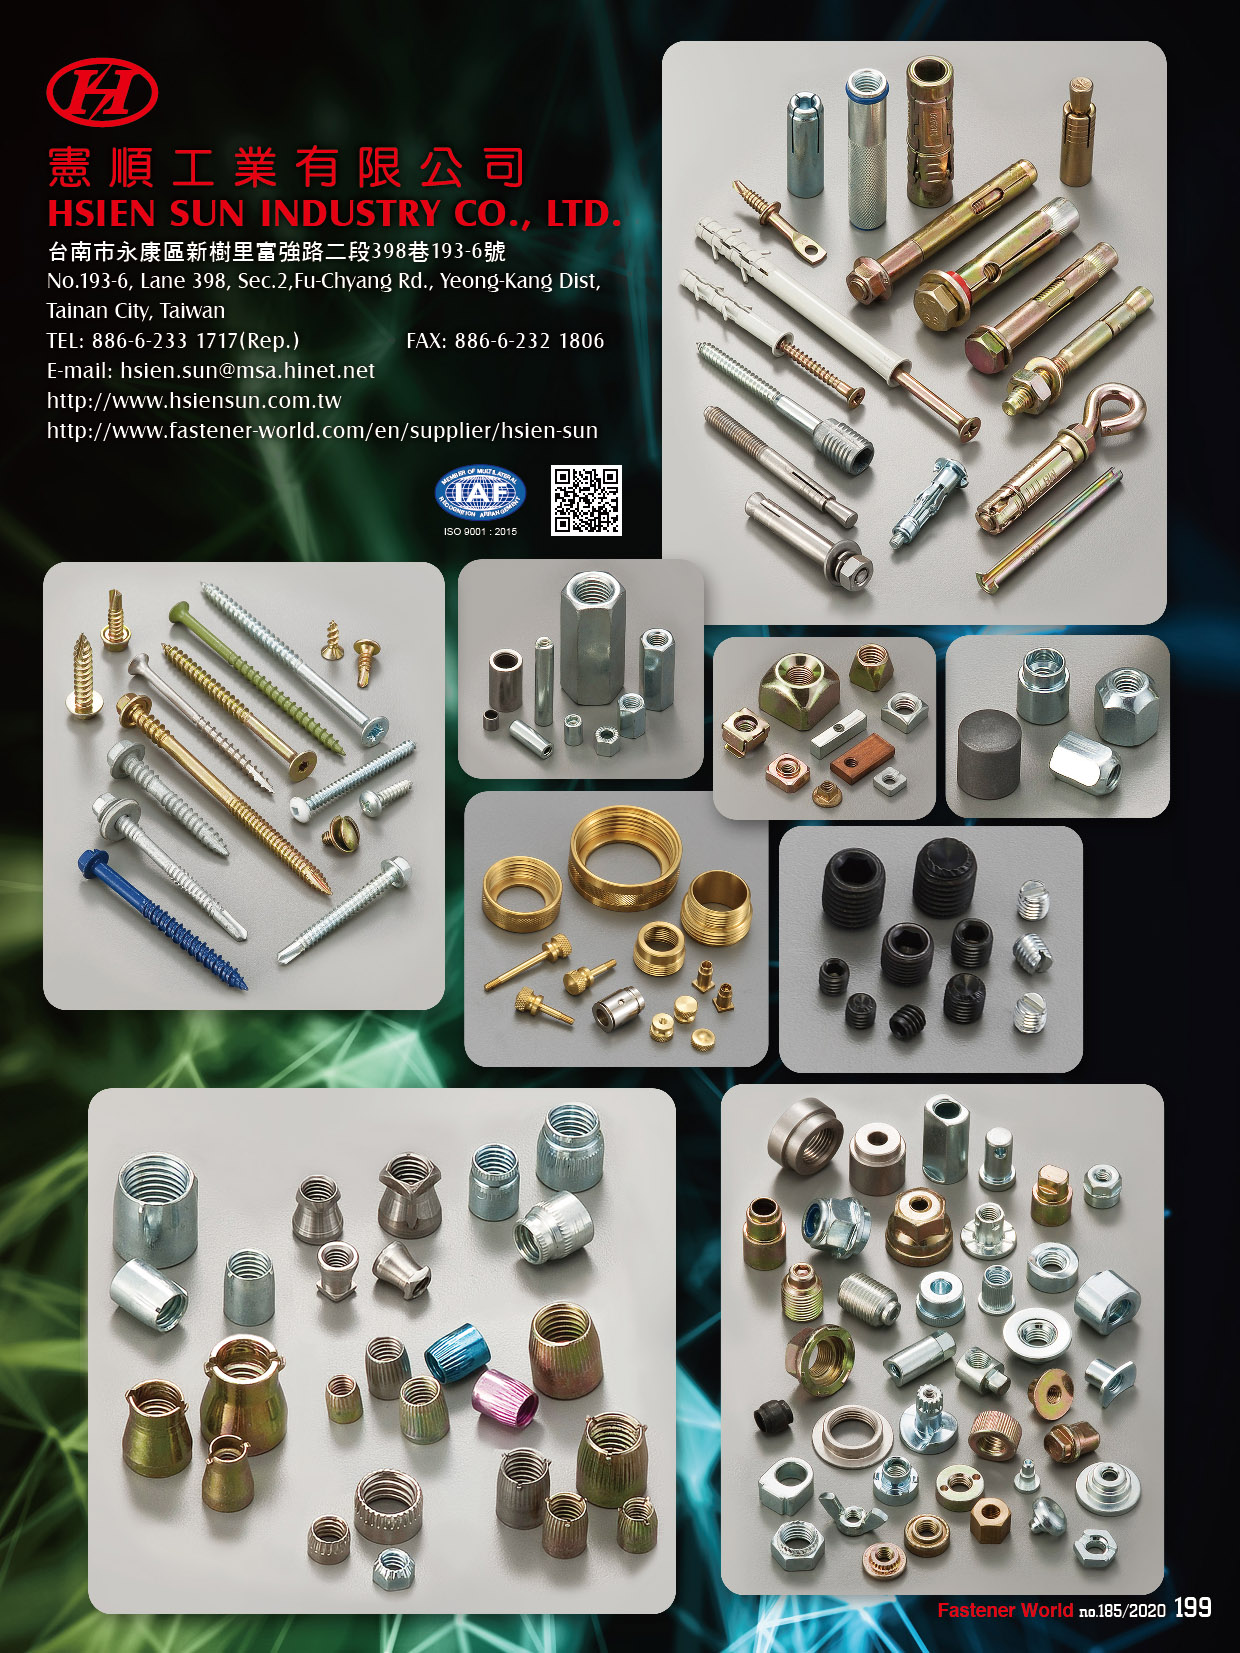 HSIEN SUN INDUSTRY CO., LTD.  , Conical Nuts, Anchor, Concrete Sleeve Anchor, Sleeve Anchor Bolt Type, Sleeve Anchor Flange Type, Heavy Duty Anchor, Zmark Heavy Duty Anchor, Wedge Anchor Nuts, Concrete Wedge Anchor, Nylon Frame Anchor (With Ring), Nylon Nail Anchor With Screw, Special Nuts, Autoparts Nuts, Bicycle Nuts, Cap Nuts, Furniture Nuts, Hex & Round Coupling Nuts, Locking Nuts, Square Nuts, Thread Nuts, T Nuts, Turning Part, Set Screws,Self Drilling Screws, Tapping Screws, Chipboard Screws , All Kinds of Screws